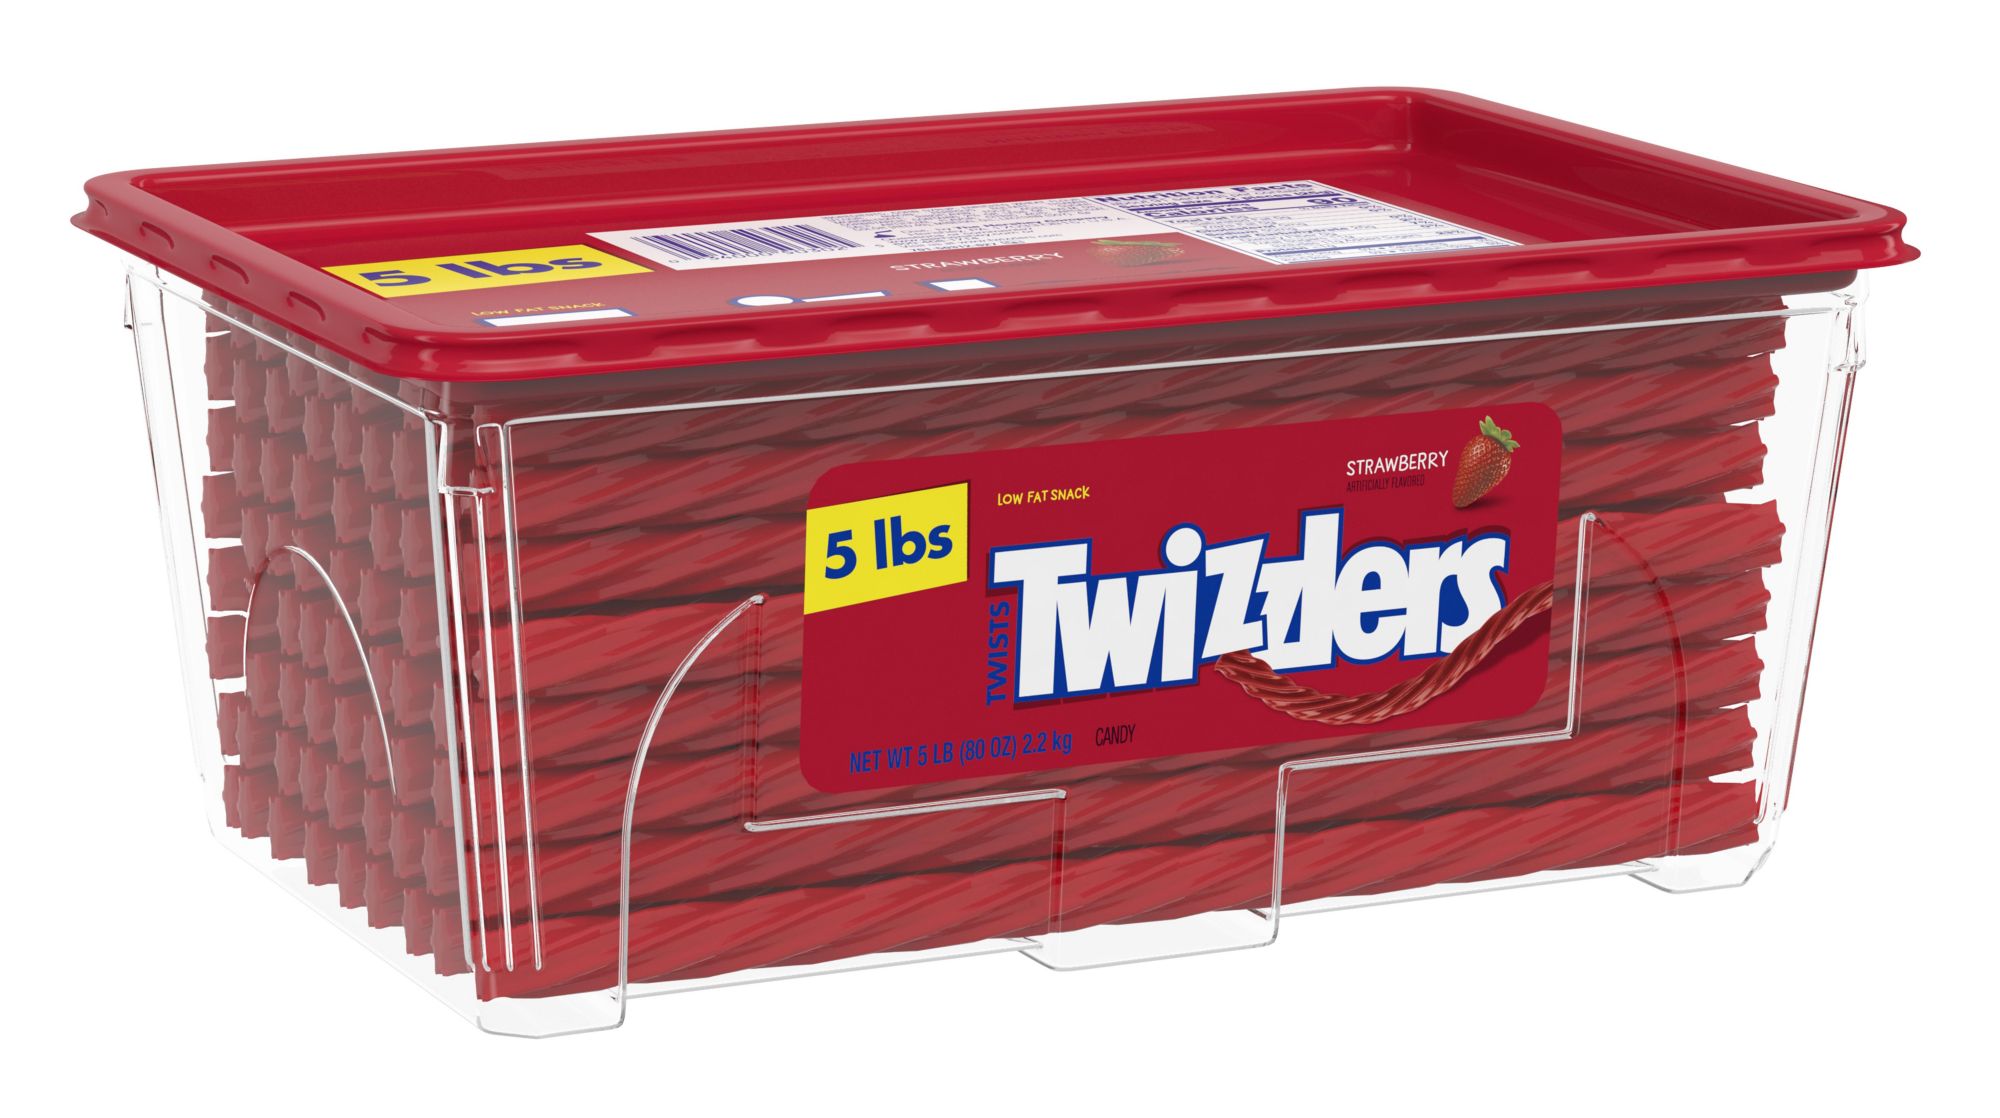 Twizzlers Twists Strawberry Flavored Chewy Candy Bulk Pack, 5 lbs.